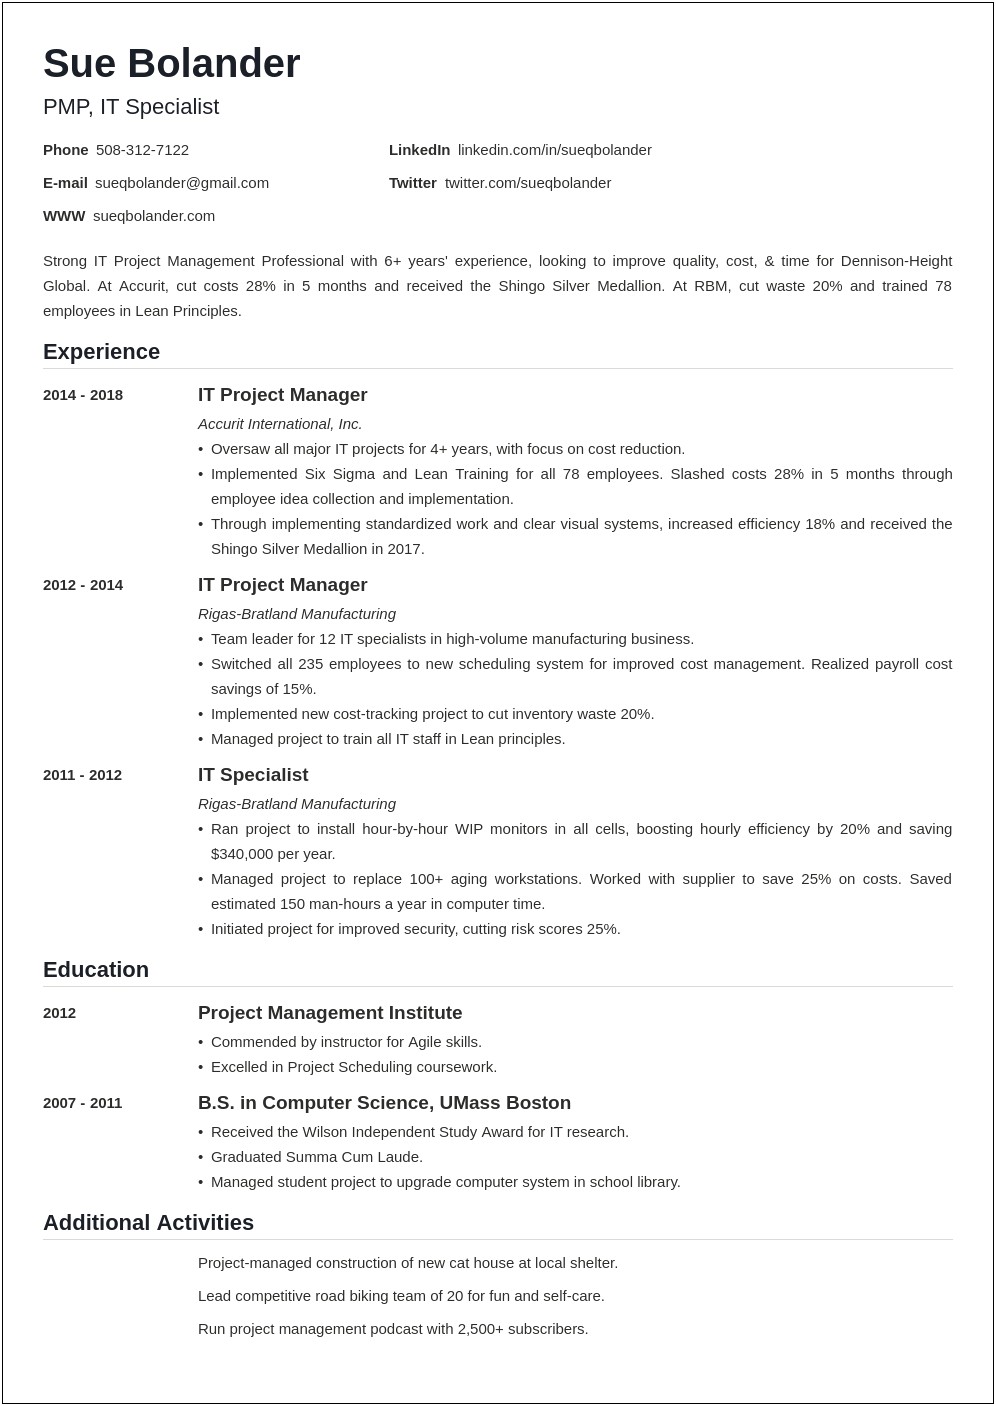 Best Resume Objective For Project Manager